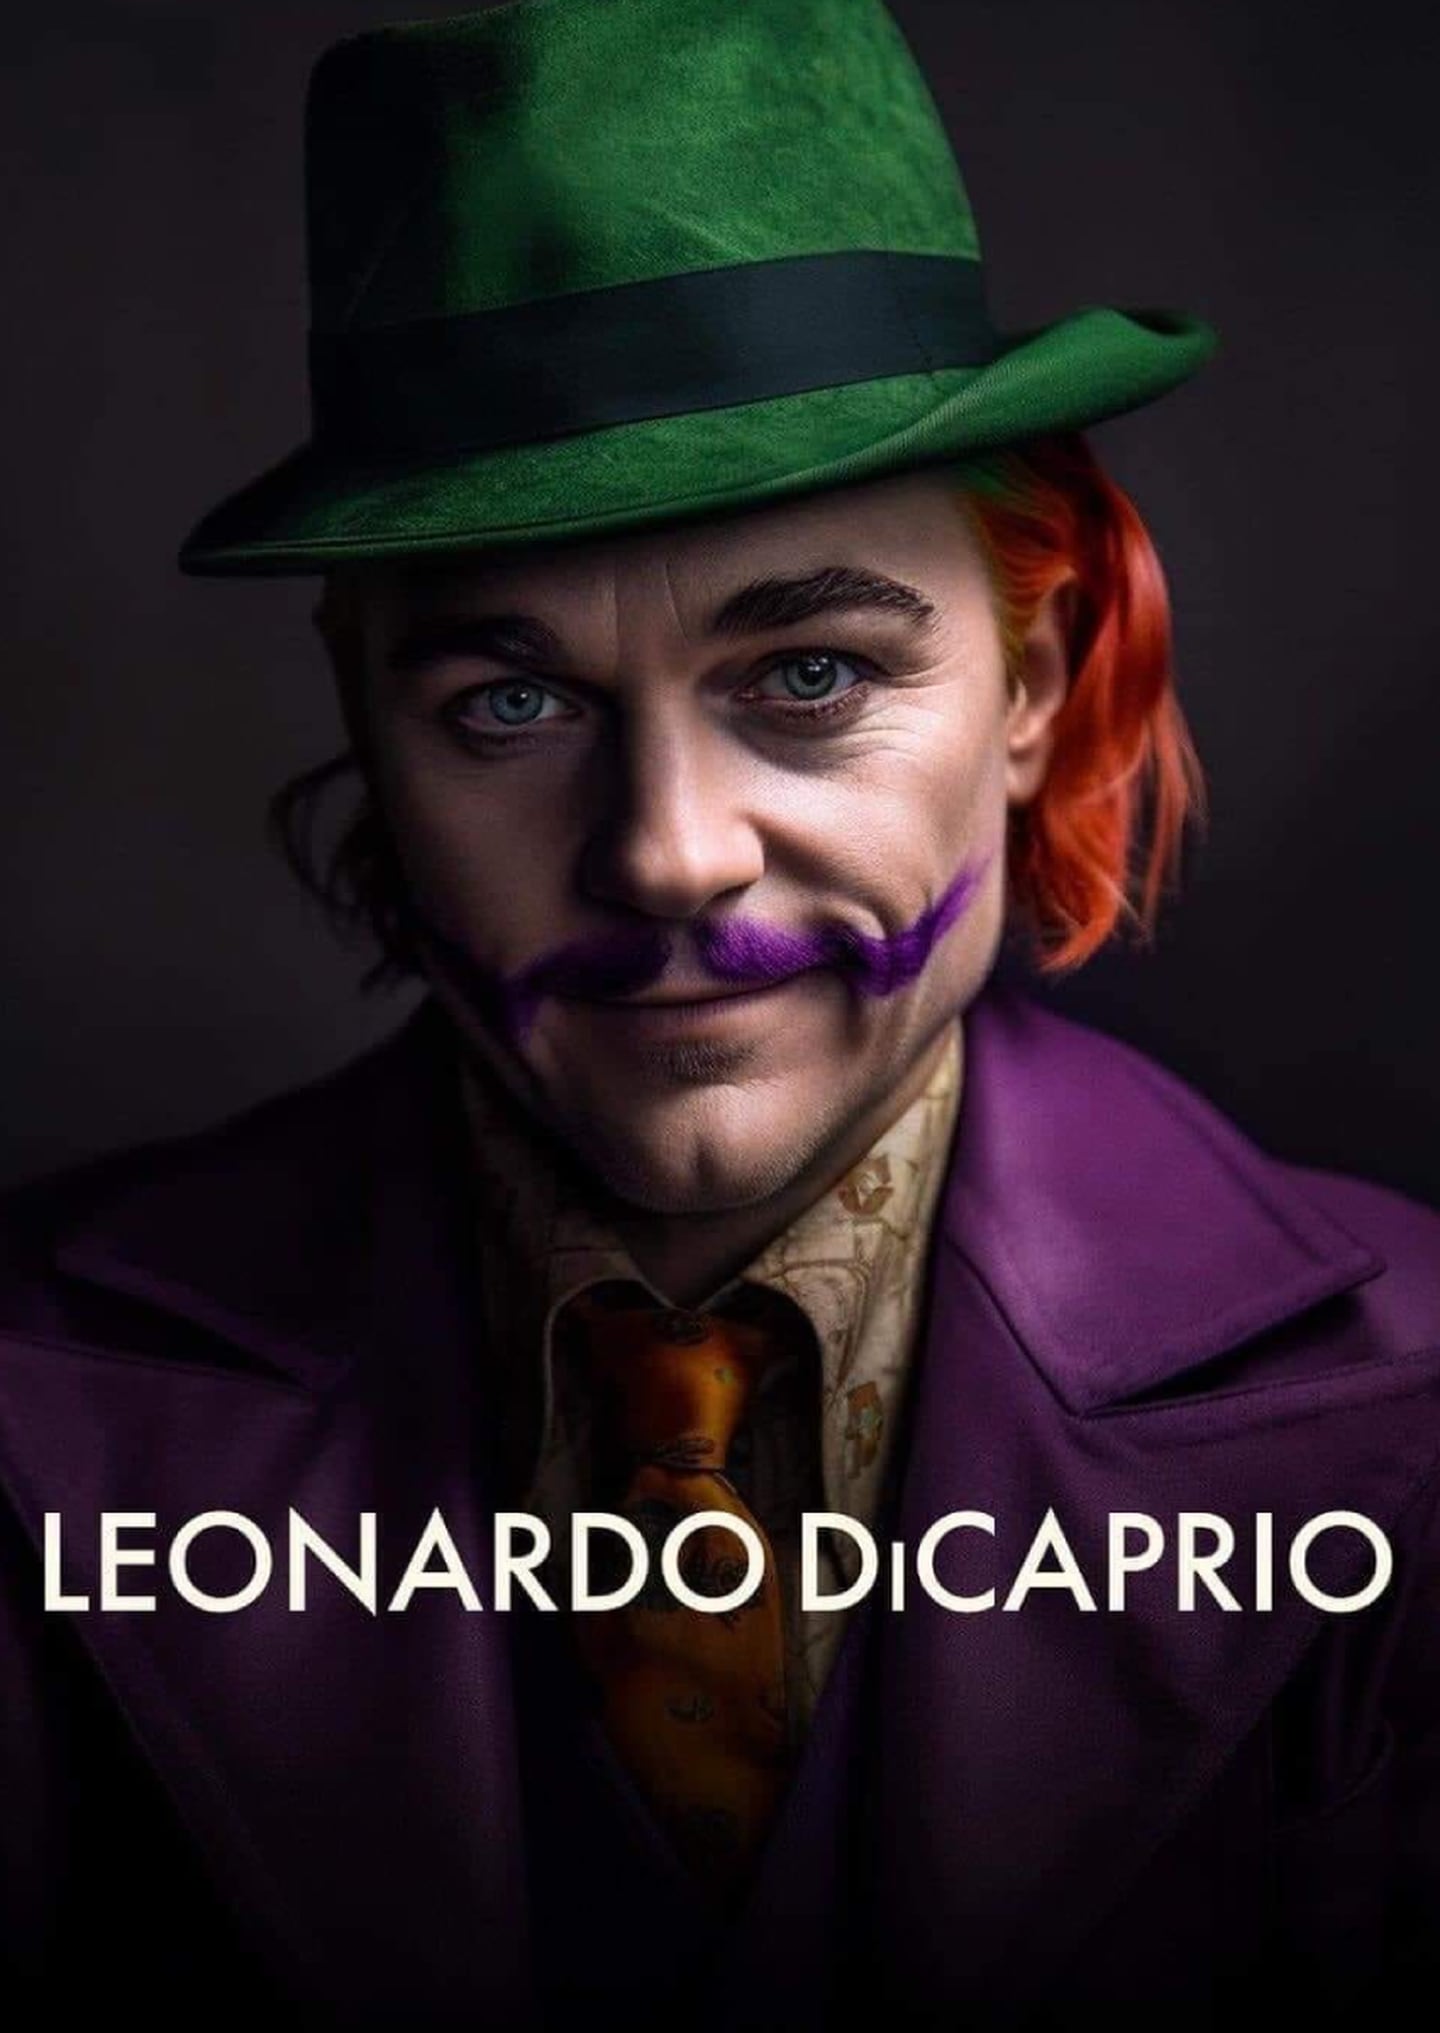 This is how one of the most relevant actors in Hollywood would look, personifying the Joker